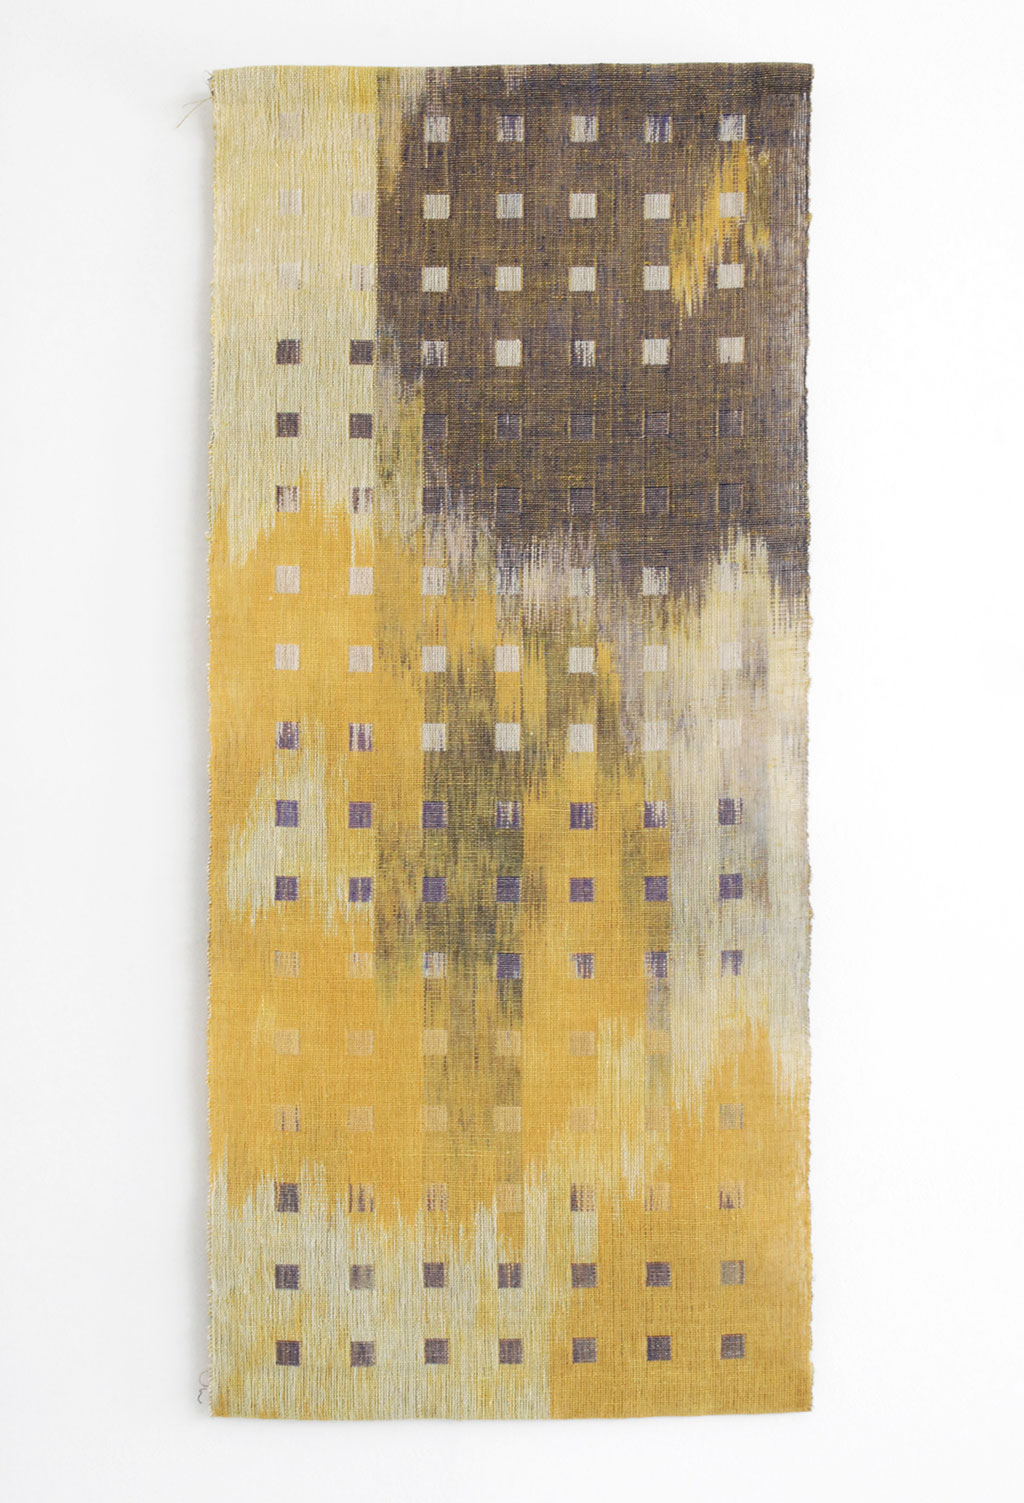 Marcia Weiss, Dialogue I, 2011. Material Meaning: A Living Legacy of Anni Albers, Craft in America